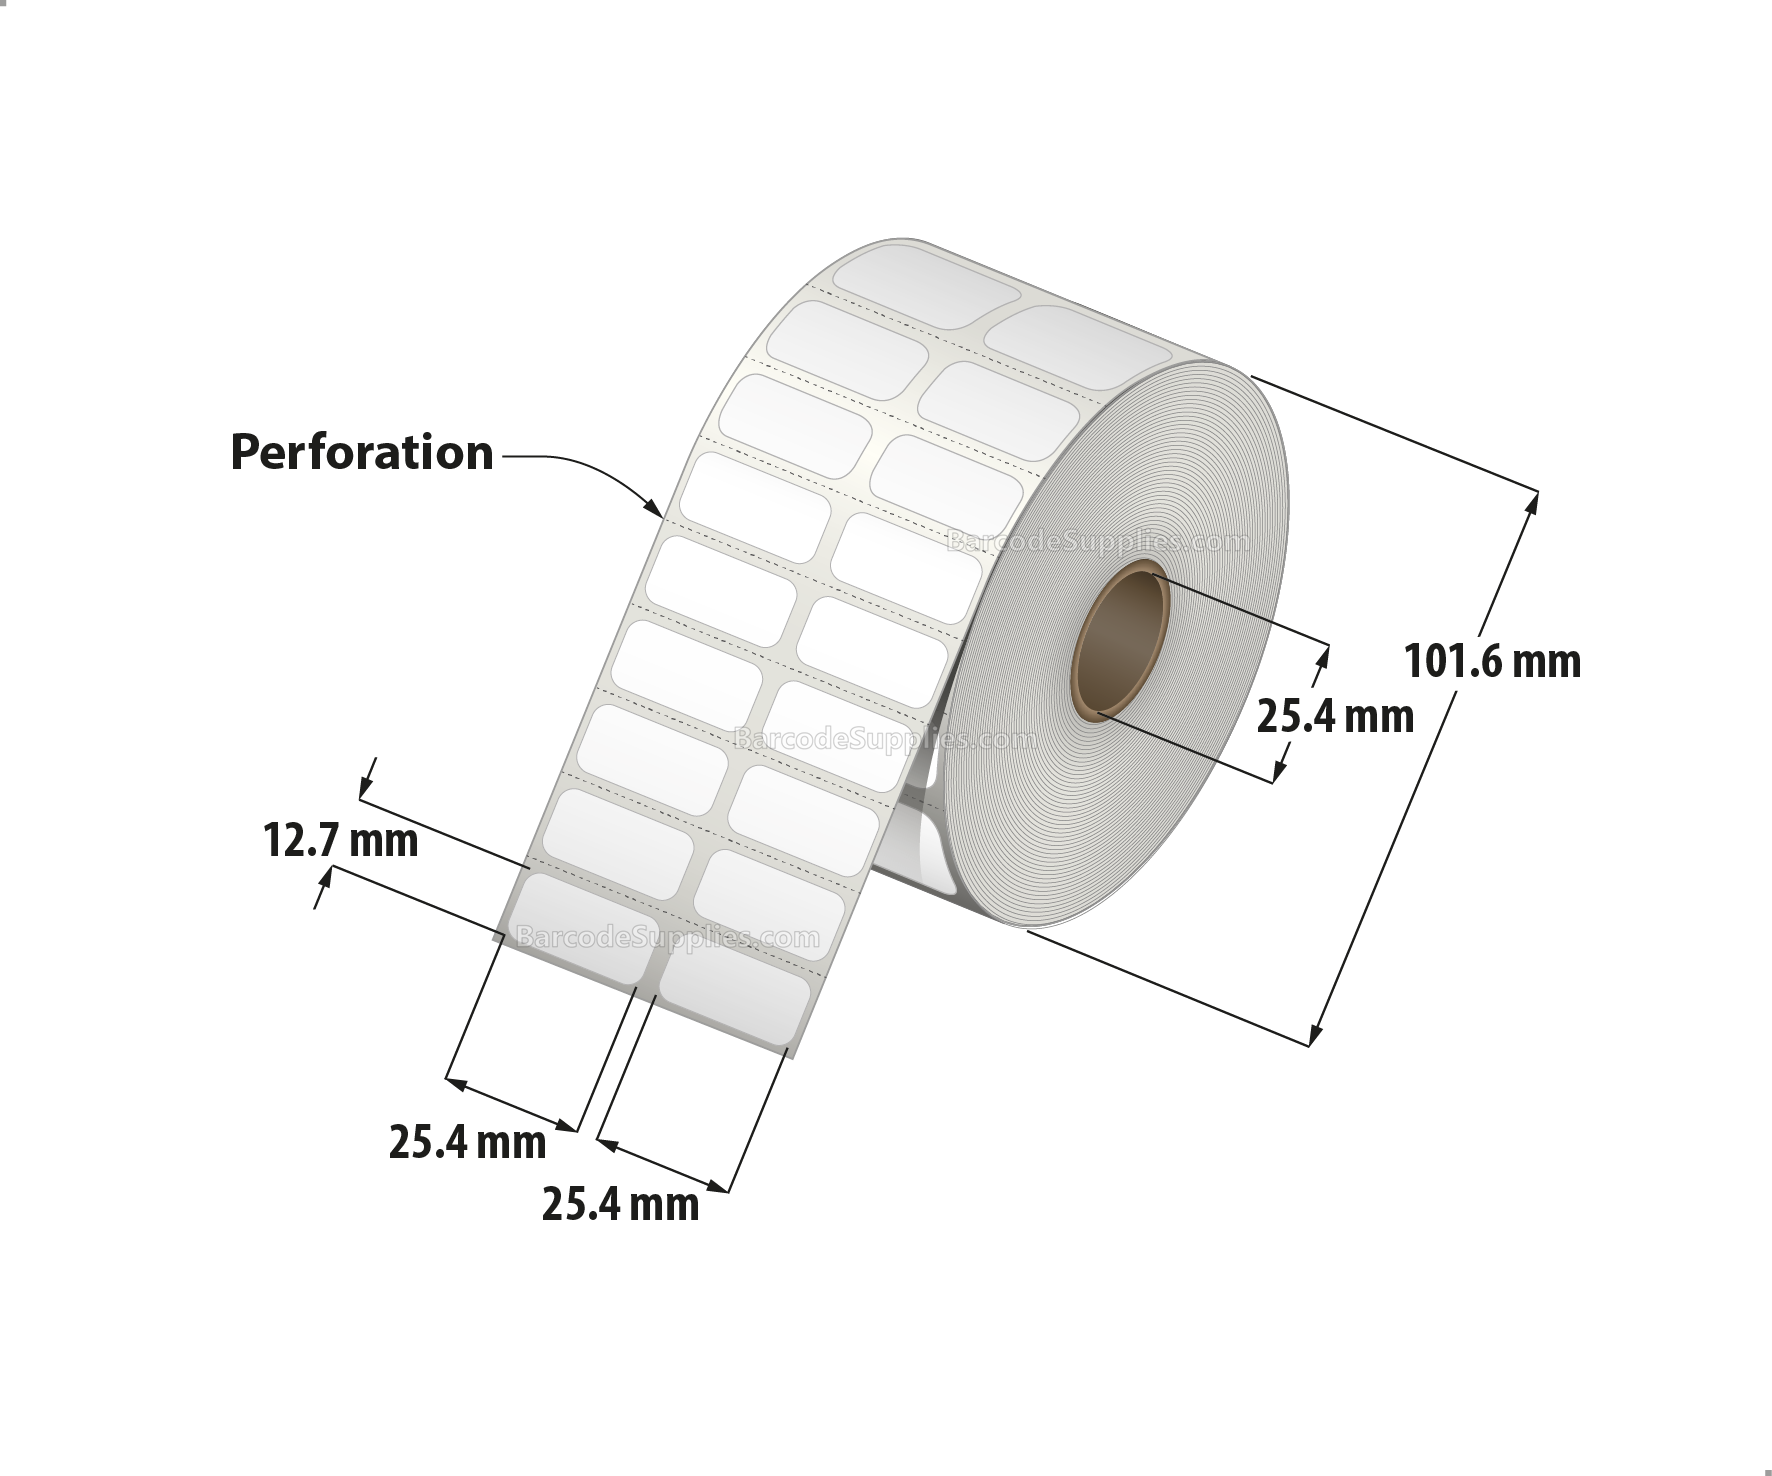 1 x 0.5 Direct Thermal White Labels With Acrylic Adhesive - Perforated - 4900 Labels Per Roll - Carton Of 12 Rolls - 58800 Labels Total - MPN: RD-1-05-4900-1